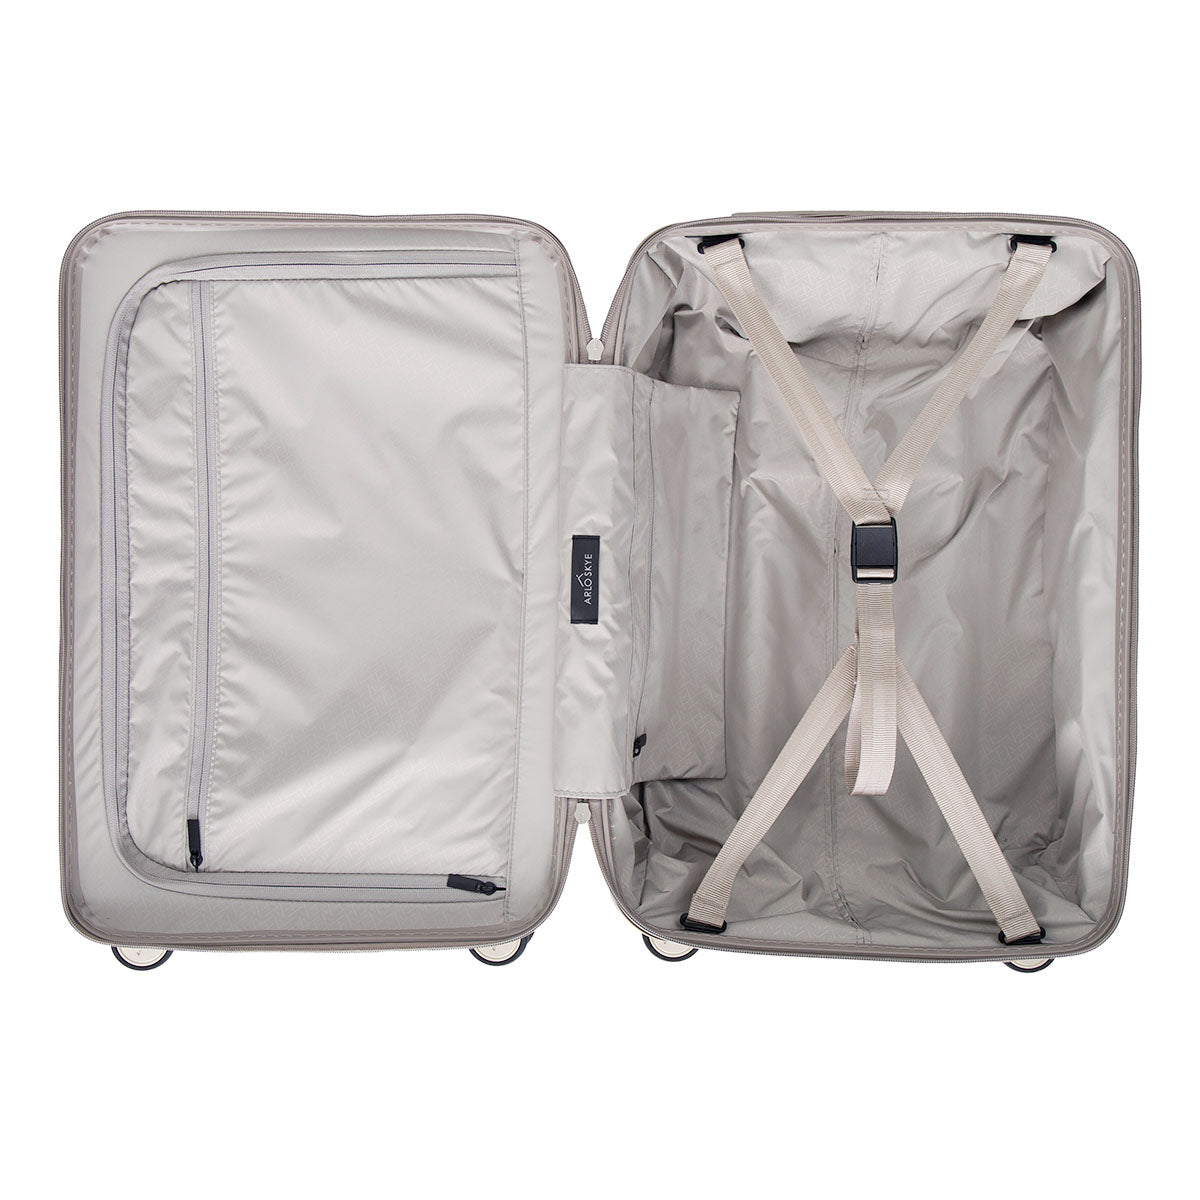 zipper carry-on max with front pocket in champagne color - interior view